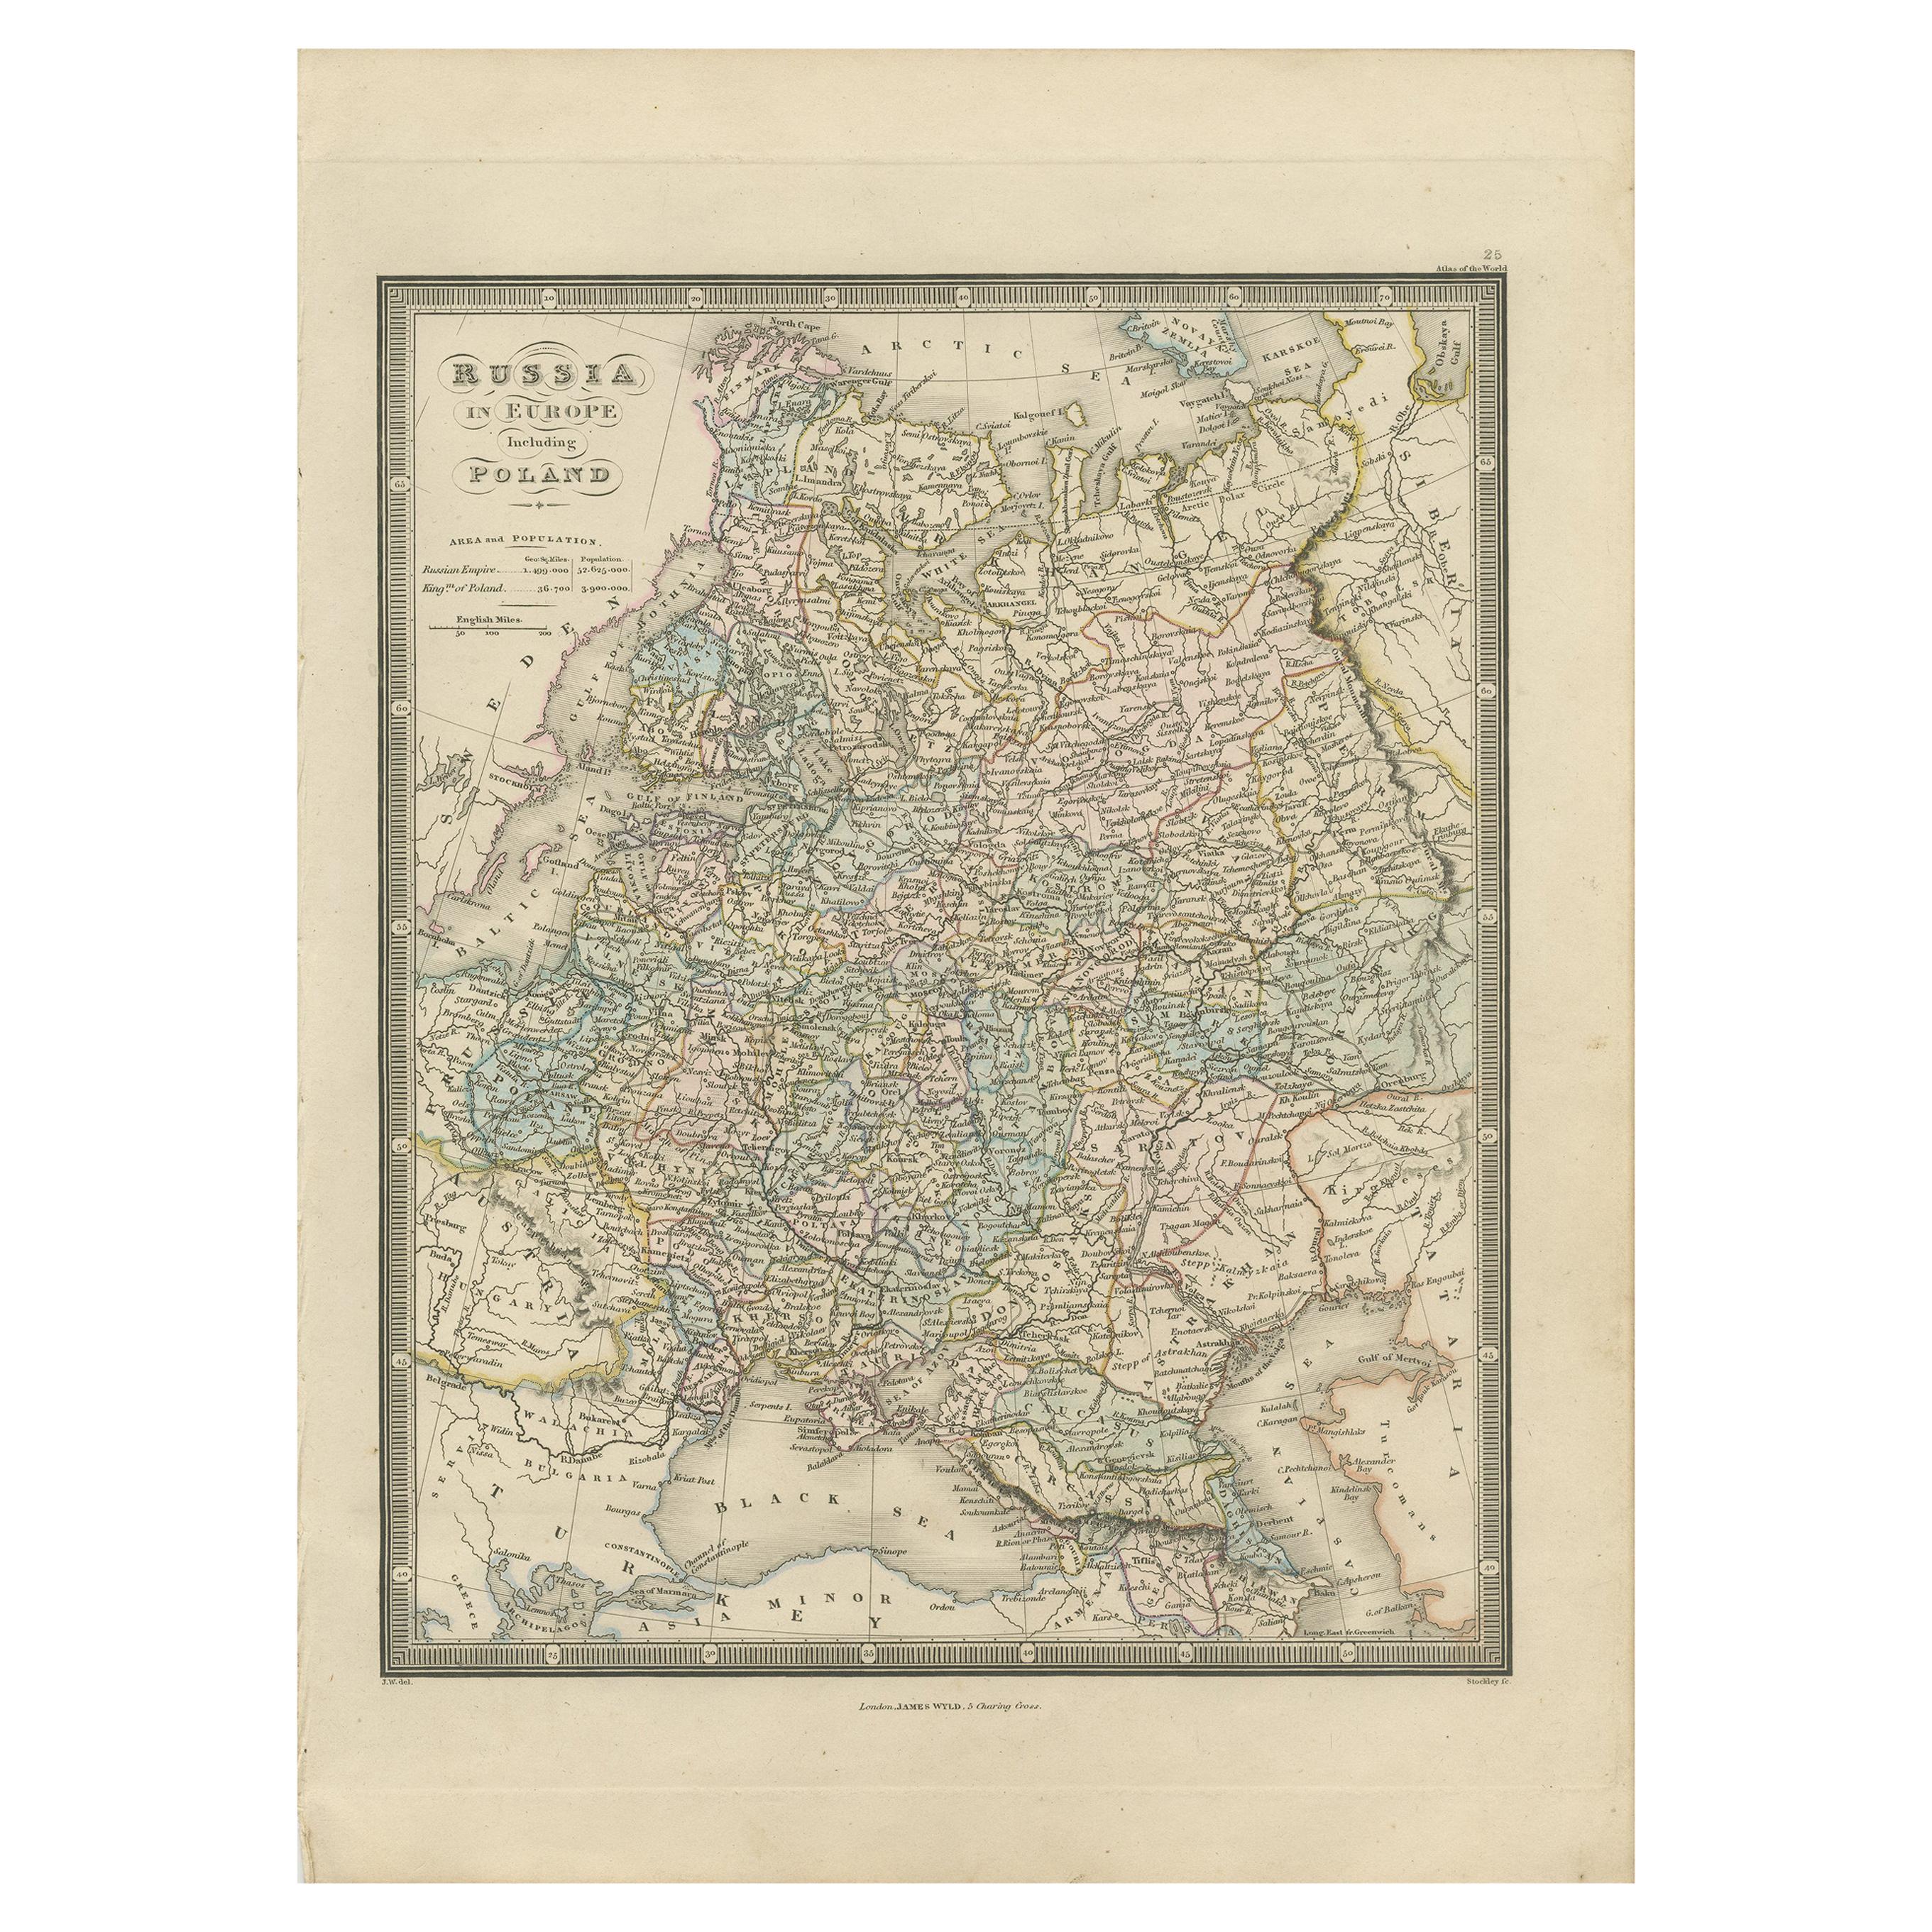 Antique Map of Russia in Europe and Poland by Wyld '1845'